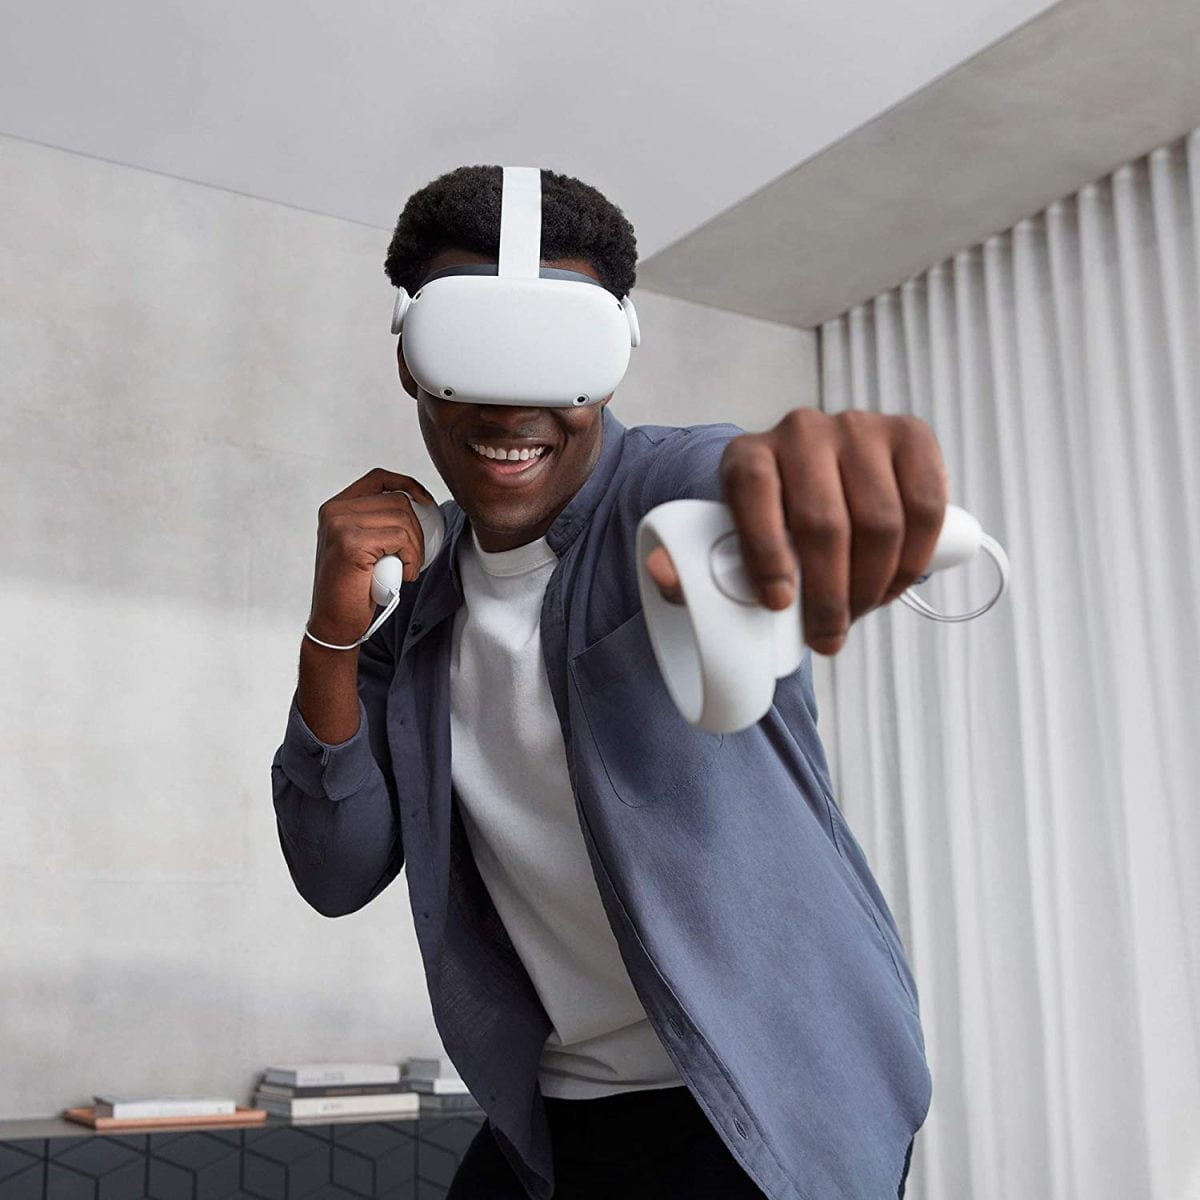 Oculus &Lt;H1&Gt;Oculus Quest 2 256 Gb Advanced All-In-One Virtual Reality Headset&Lt;/H1&Gt; Https://Youtu.be/Atvgl9Wojsm &Lt;Ul Class=&Quot;A-Unordered-List A-Vertical A-Spacing-Mini&Quot;&Gt; &Lt;Li&Gt;&Lt;Span Class=&Quot;A-List-Item&Quot;&Gt;Voltage: 100-240 V&Lt;/Span&Gt;&Lt;/Li&Gt; &Lt;Li&Gt;&Lt;Span Class=&Quot;A-List-Item&Quot;&Gt;Next-Level Hardware - Make Every Move Count With A Blazing-Fast Processor And Our Highest-Resolution Display&Lt;/Span&Gt;&Lt;/Li&Gt; &Lt;Li&Gt;&Lt;Span Class=&Quot;A-List-Item&Quot;&Gt;All-In-One Gaming - With Backward Compatibility, You Can Explore New Titles And Old Favorites In The Expansive Quest Content Library&Lt;/Span&Gt;&Lt;/Li&Gt; &Lt;Li&Gt;&Lt;Span Class=&Quot;A-List-Item&Quot;&Gt;Immersive Entertainment - Get The Best Seat In The House To Live Concerts, Groundbreaking Films, Exclusive Events And More&Lt;/Span&Gt;&Lt;/Li&Gt; &Lt;Li&Gt;&Lt;Span Class=&Quot;A-List-Item&Quot;&Gt;Easy Setup - Just Open The Box, Set Up With The Smartphone App And Jump Into Vr. No Pc Or Console Needed. Requires Wireless Internet Access And The Oculus App (Free Download) To Set Up Device Premium Display - Catch Every Detail With A Stunning Display That Features 50% More Pixels Than The Original Quest Ultimate Control - Redesigned Oculus Touch Controllers Transport Your Movements Directly Into Vr With Intuitive Controls Pc Vr Compatible - Step Into Incredible Oculus Rift Titles By Connecting An Oculus Link Cable To A Compatible Gaming Pc. Oculus Link Cable Sold Separately 3D Cinematic Sound - Hear In All Directions With Built-In Speakers That Deliver Cinematic 3D Positional Audio&Lt;/Span&Gt;&Lt;/Li&Gt; &Lt;/Ul&Gt; &Nbsp; Oculus Quest 2 Oculus Quest 2 256 Gb - Advanced All-In-One Virtual Reality Headset